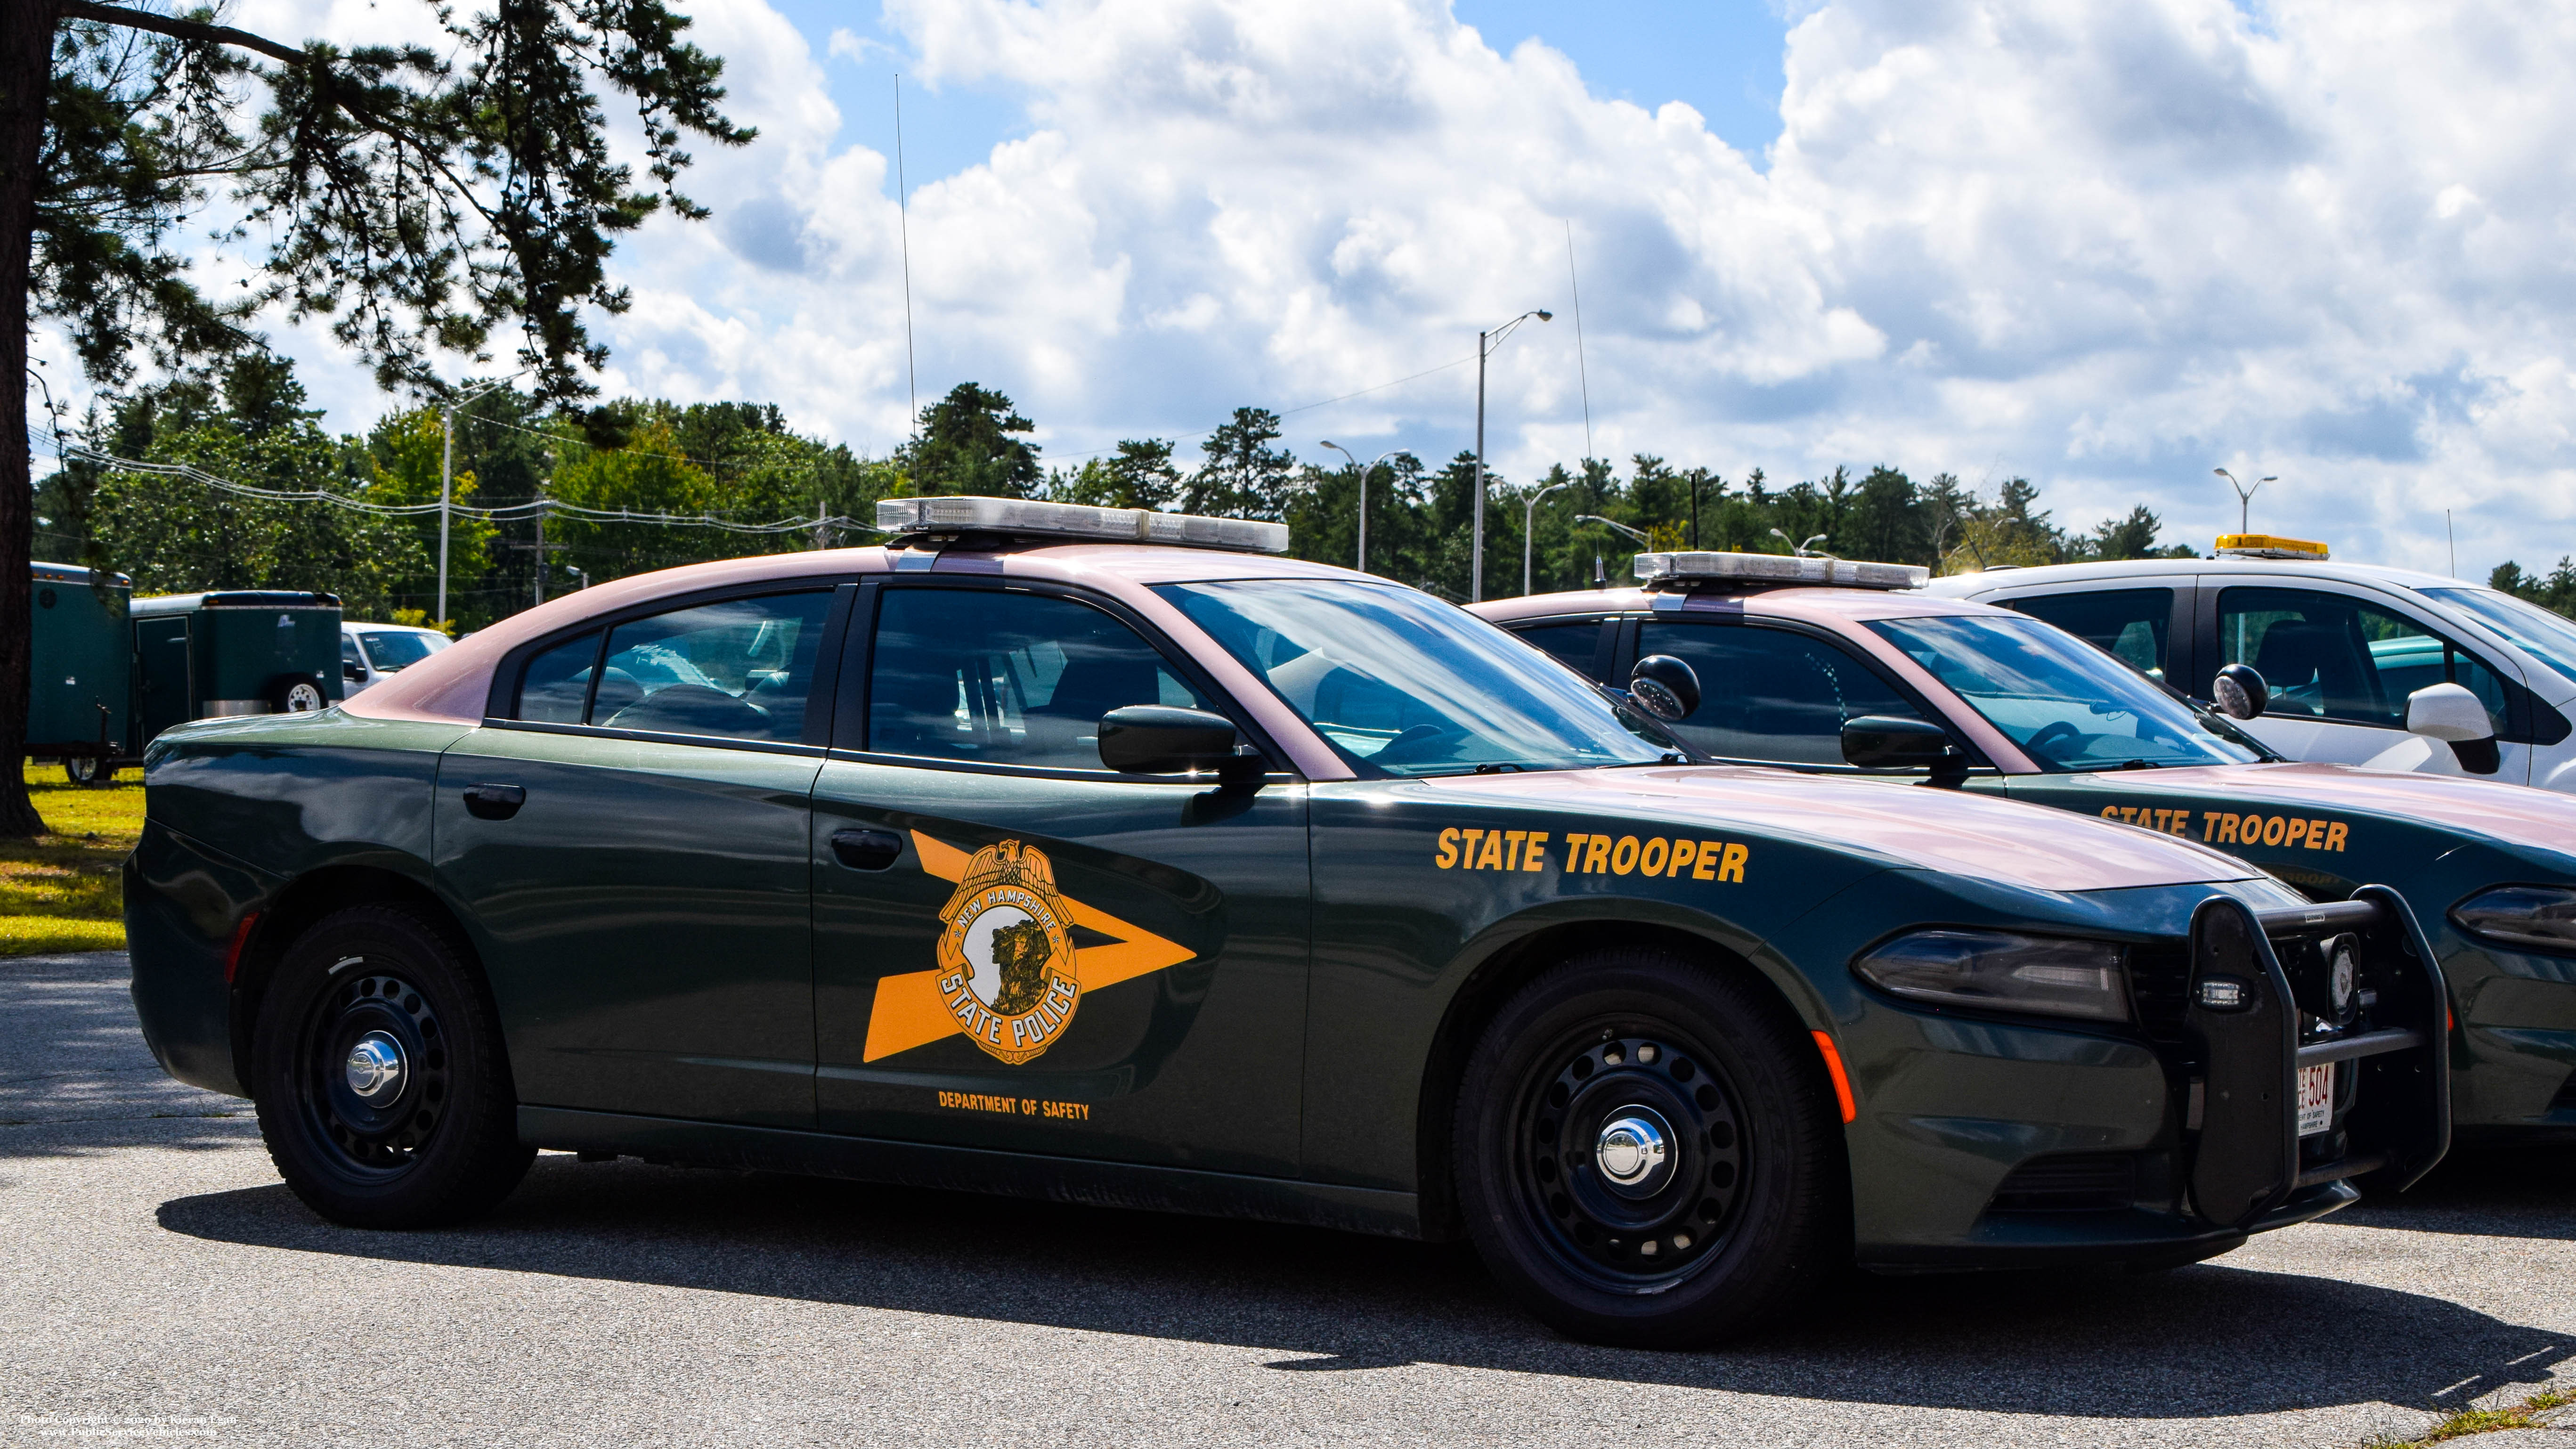 A photo  of New Hampshire State Police
            Cruiser 504, a 2015-2019 Dodge Charger             taken by Kieran Egan